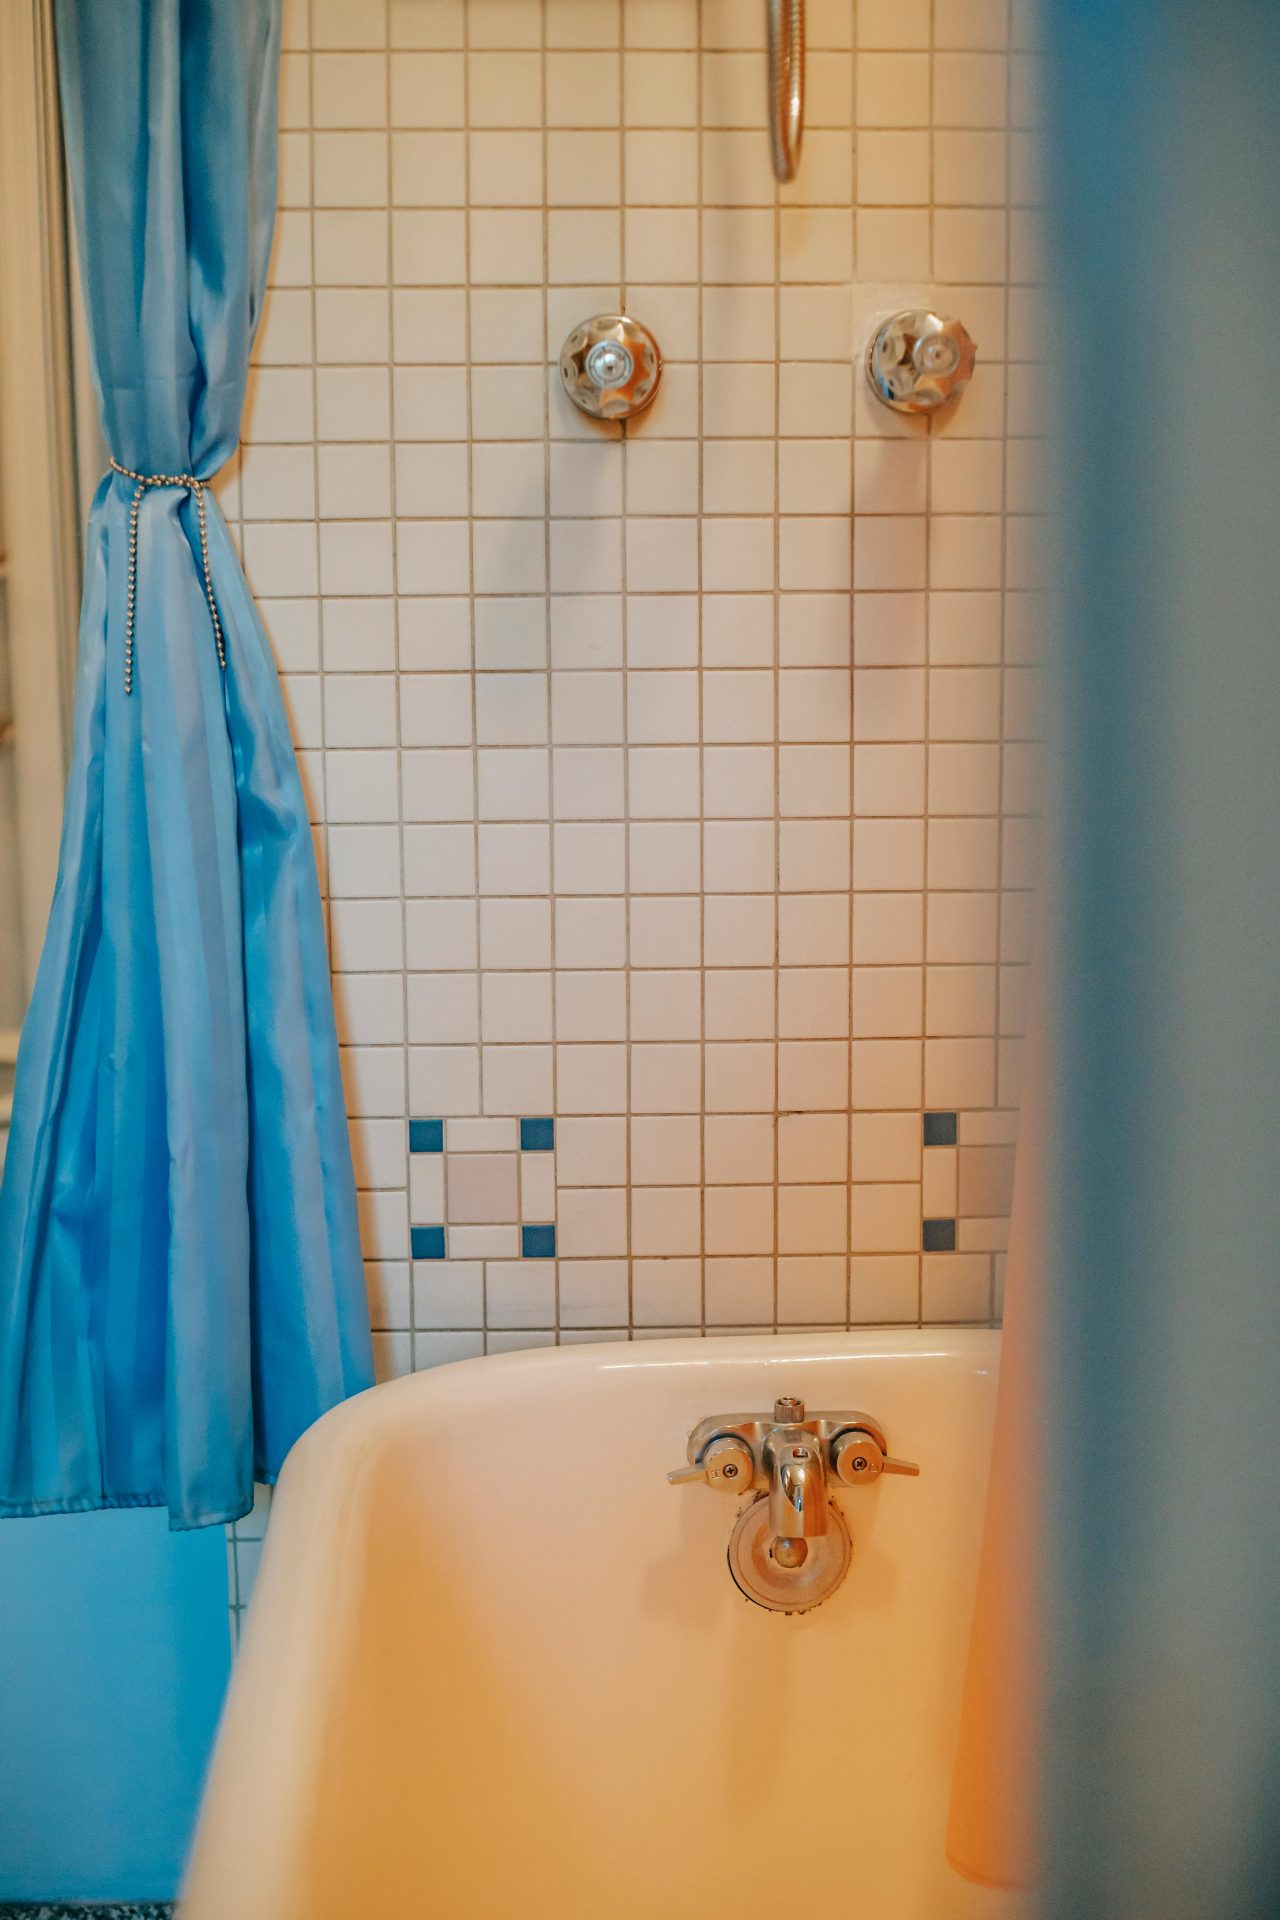 Selecting the Ideal Shower Curtain